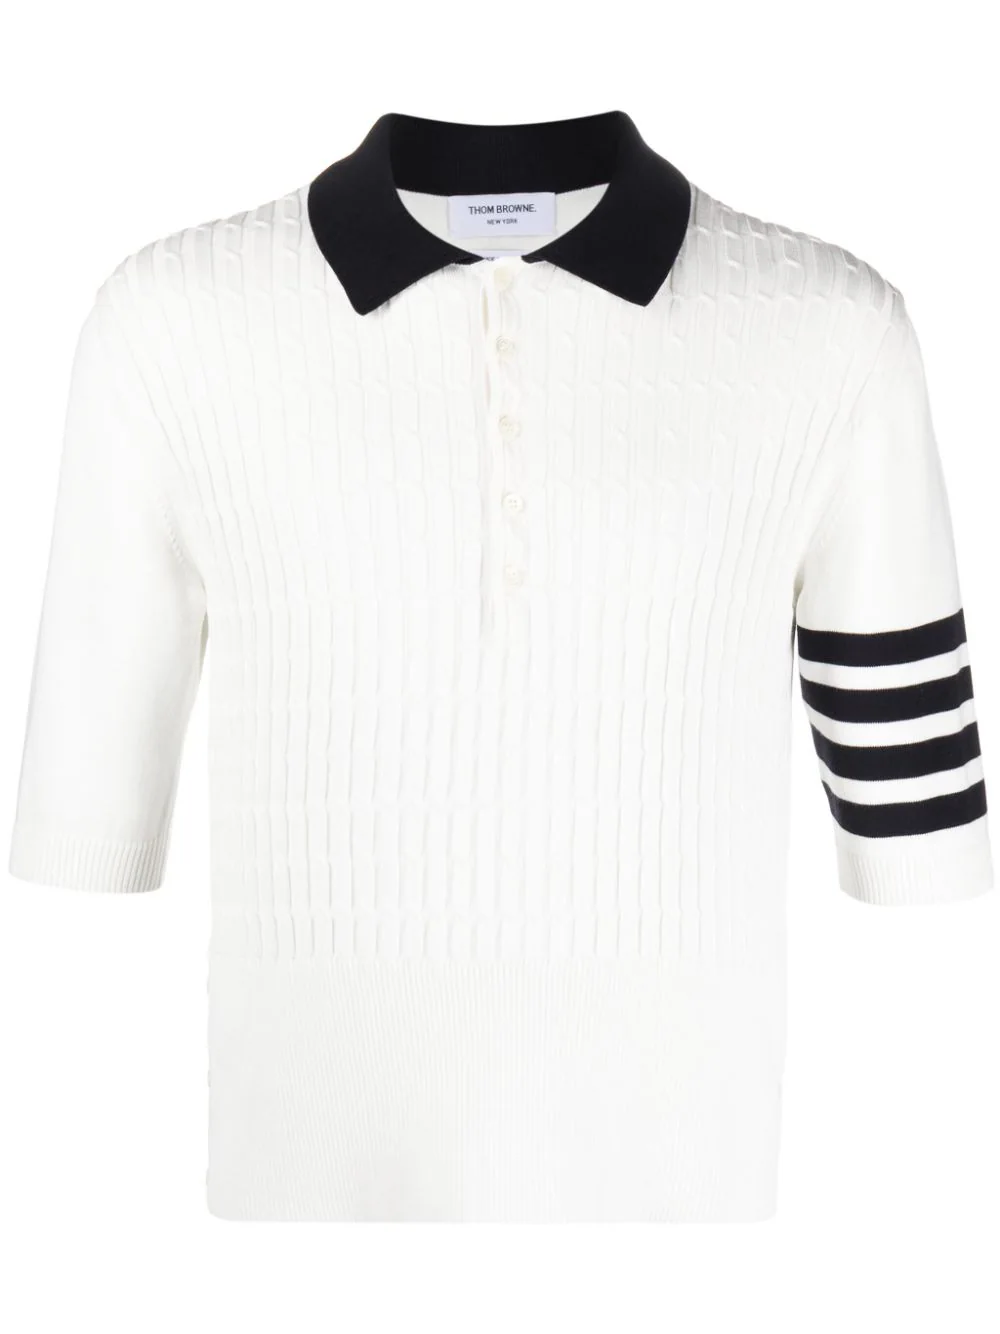 Placed Baby Cable Rib Stitch Ss Polo In Cotton W/ 4 Bar Stripe White